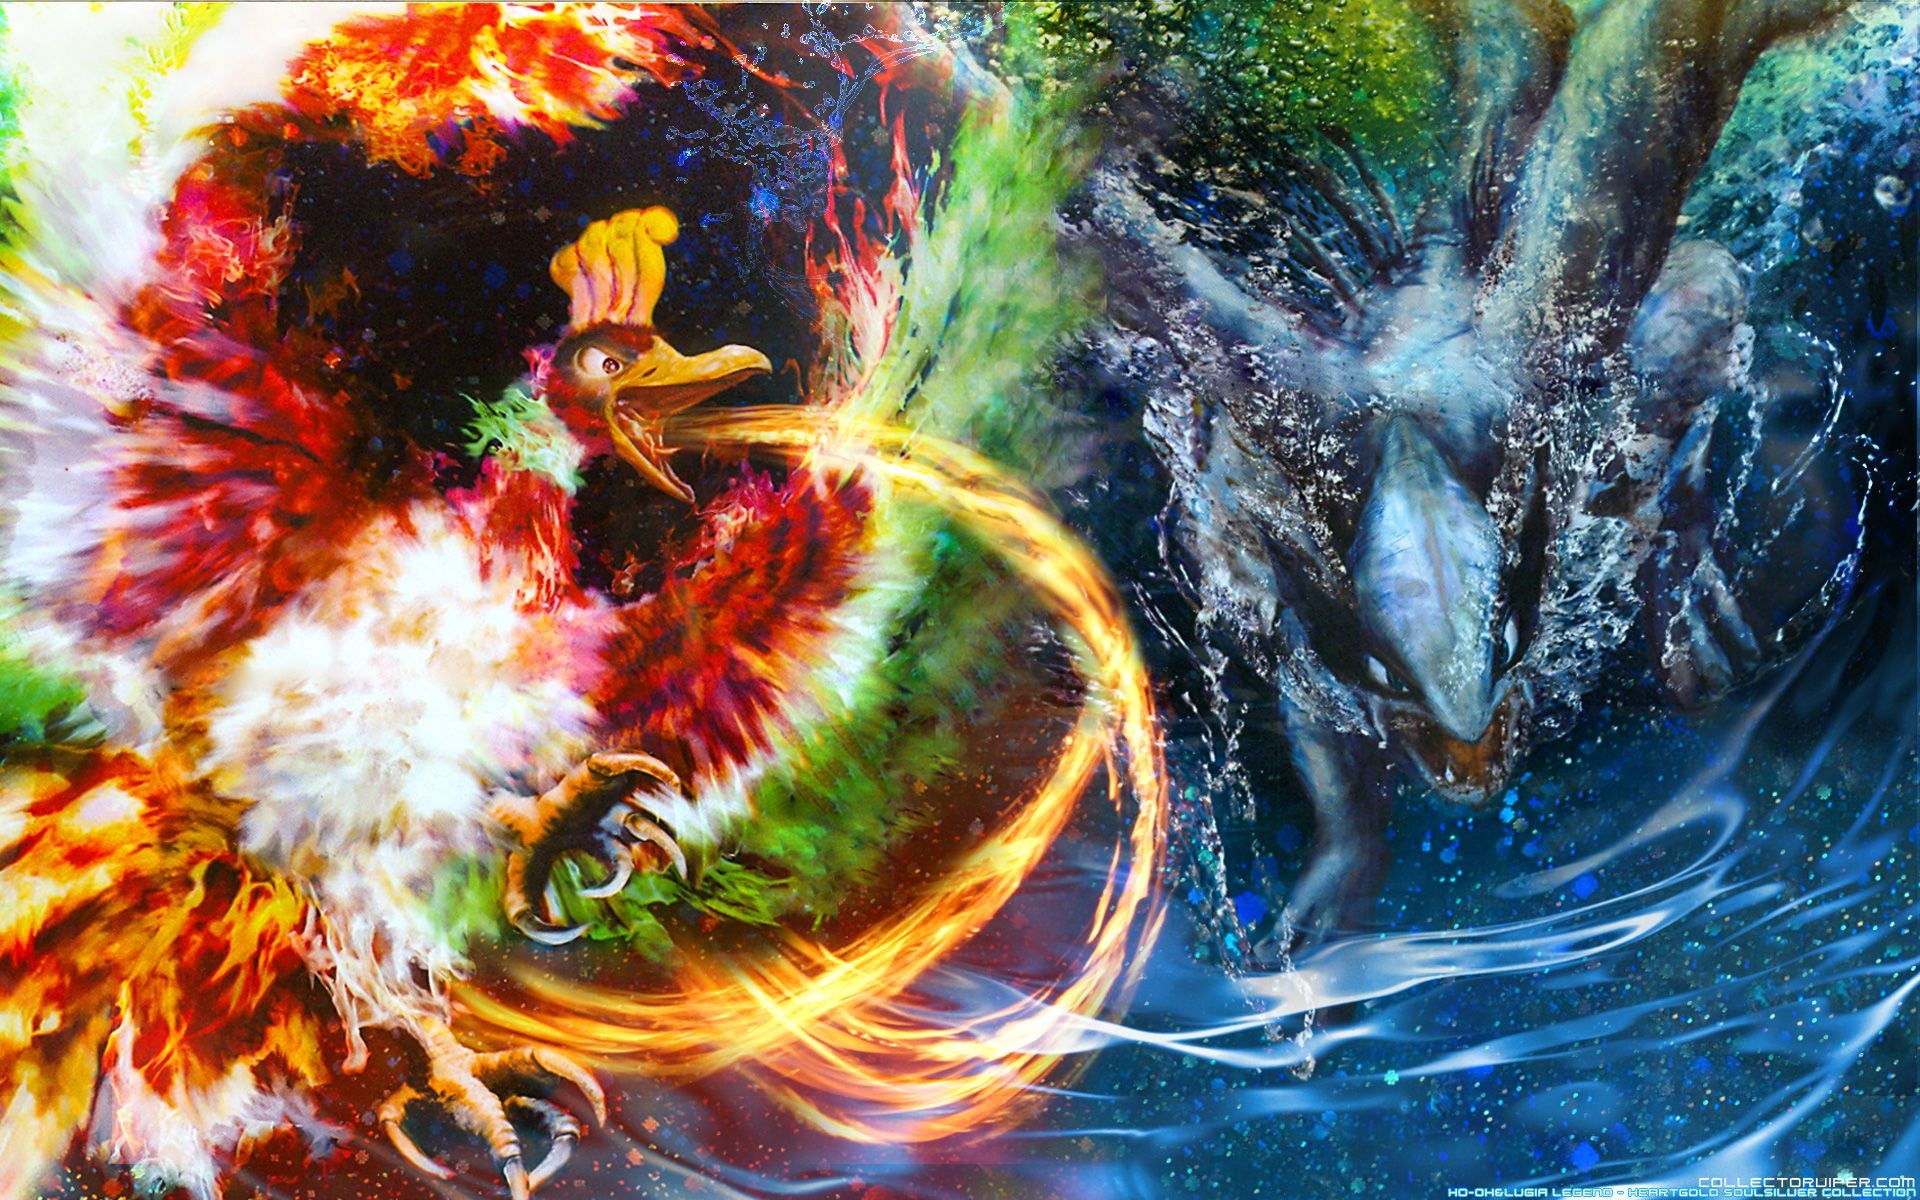 Epic pokemon pics today, so how about an epic pokemon wallpaper off